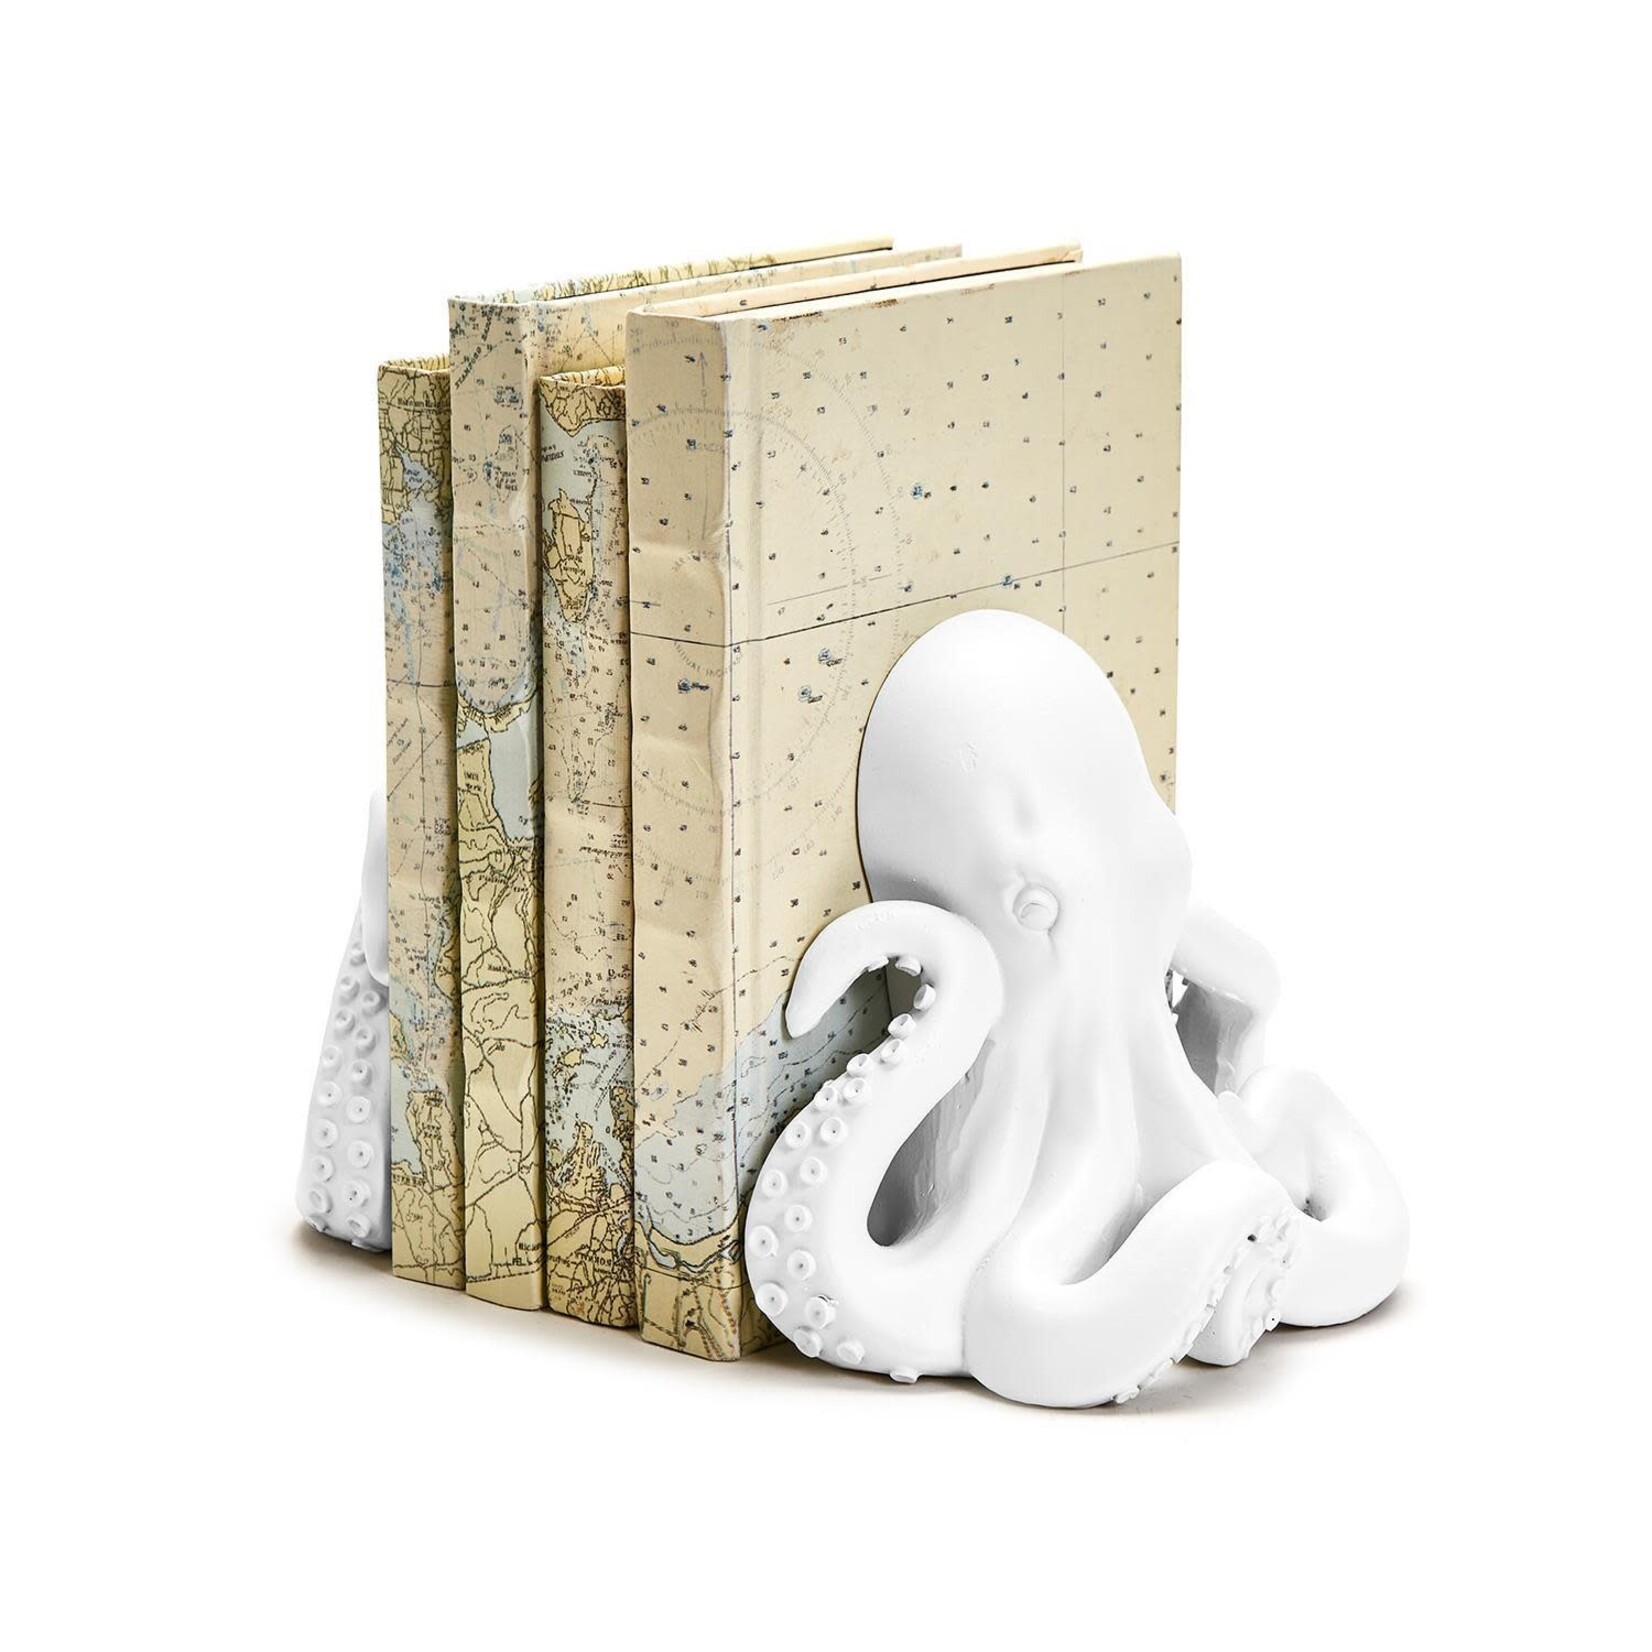 Outside The Box 6" Set Of 2 Octopus White Resin Bookends